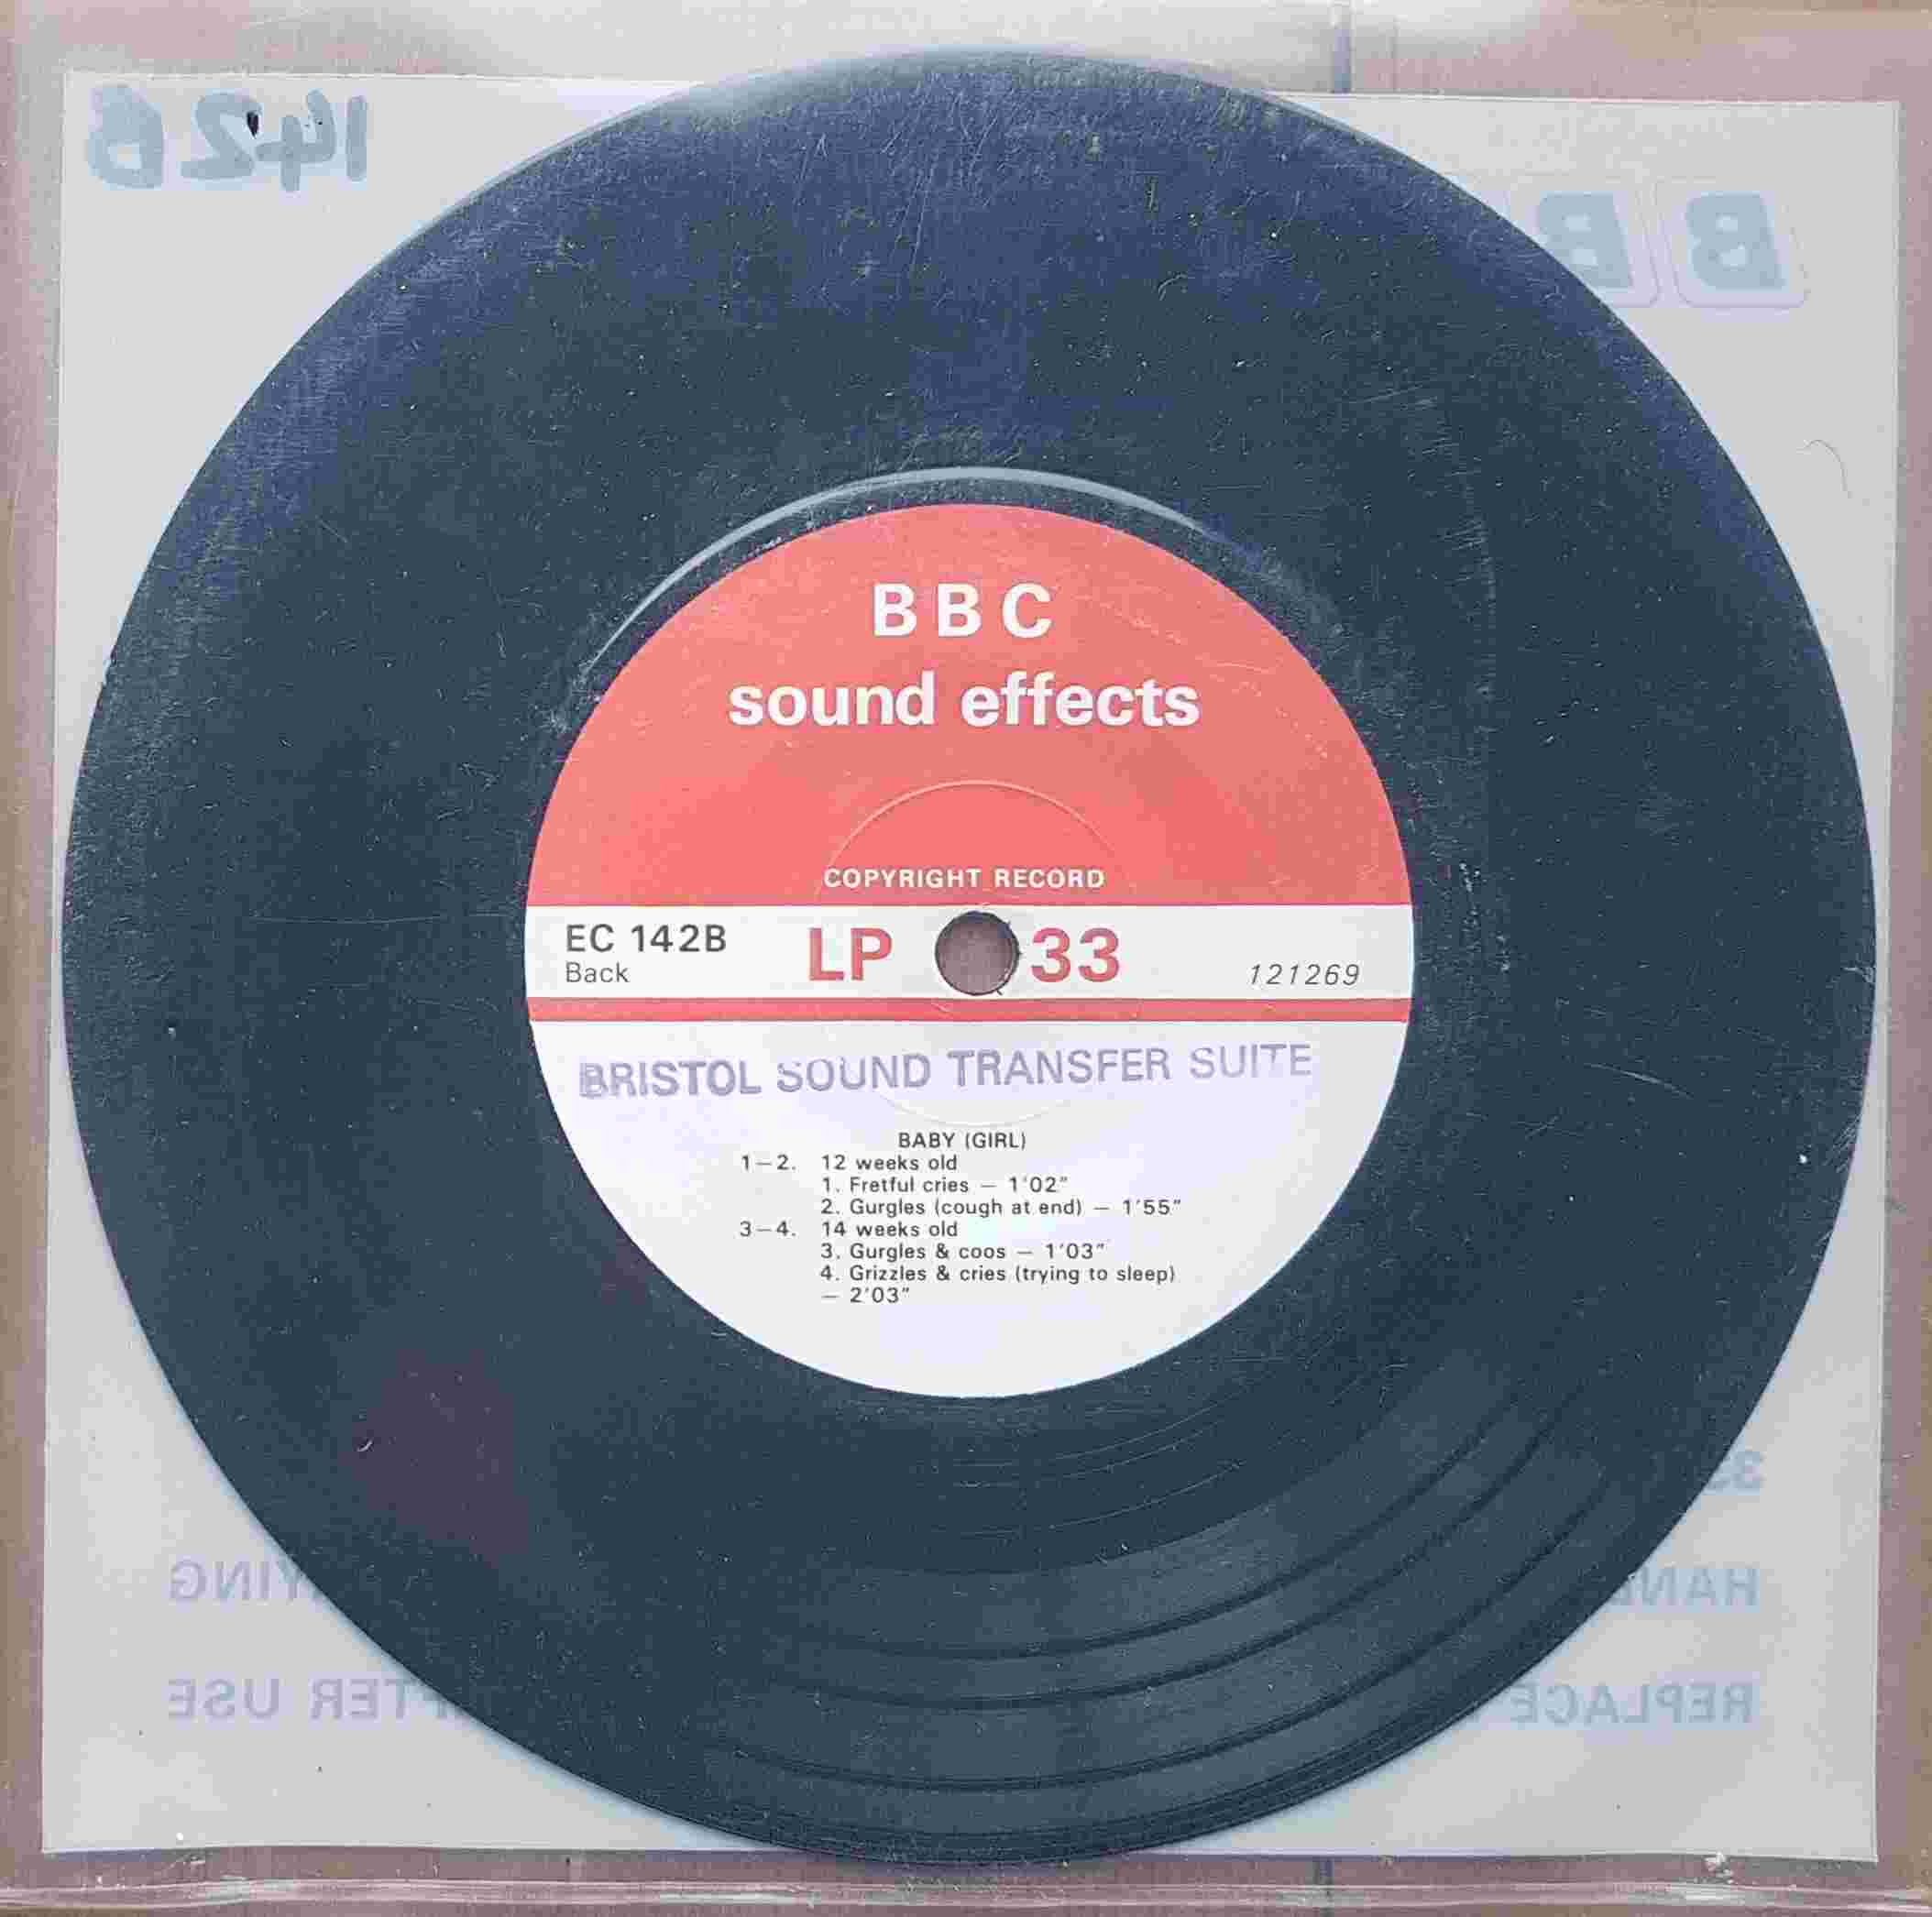 Picture of EC 142B Baby (Girl) by artist Not registered from the BBC records and Tapes library